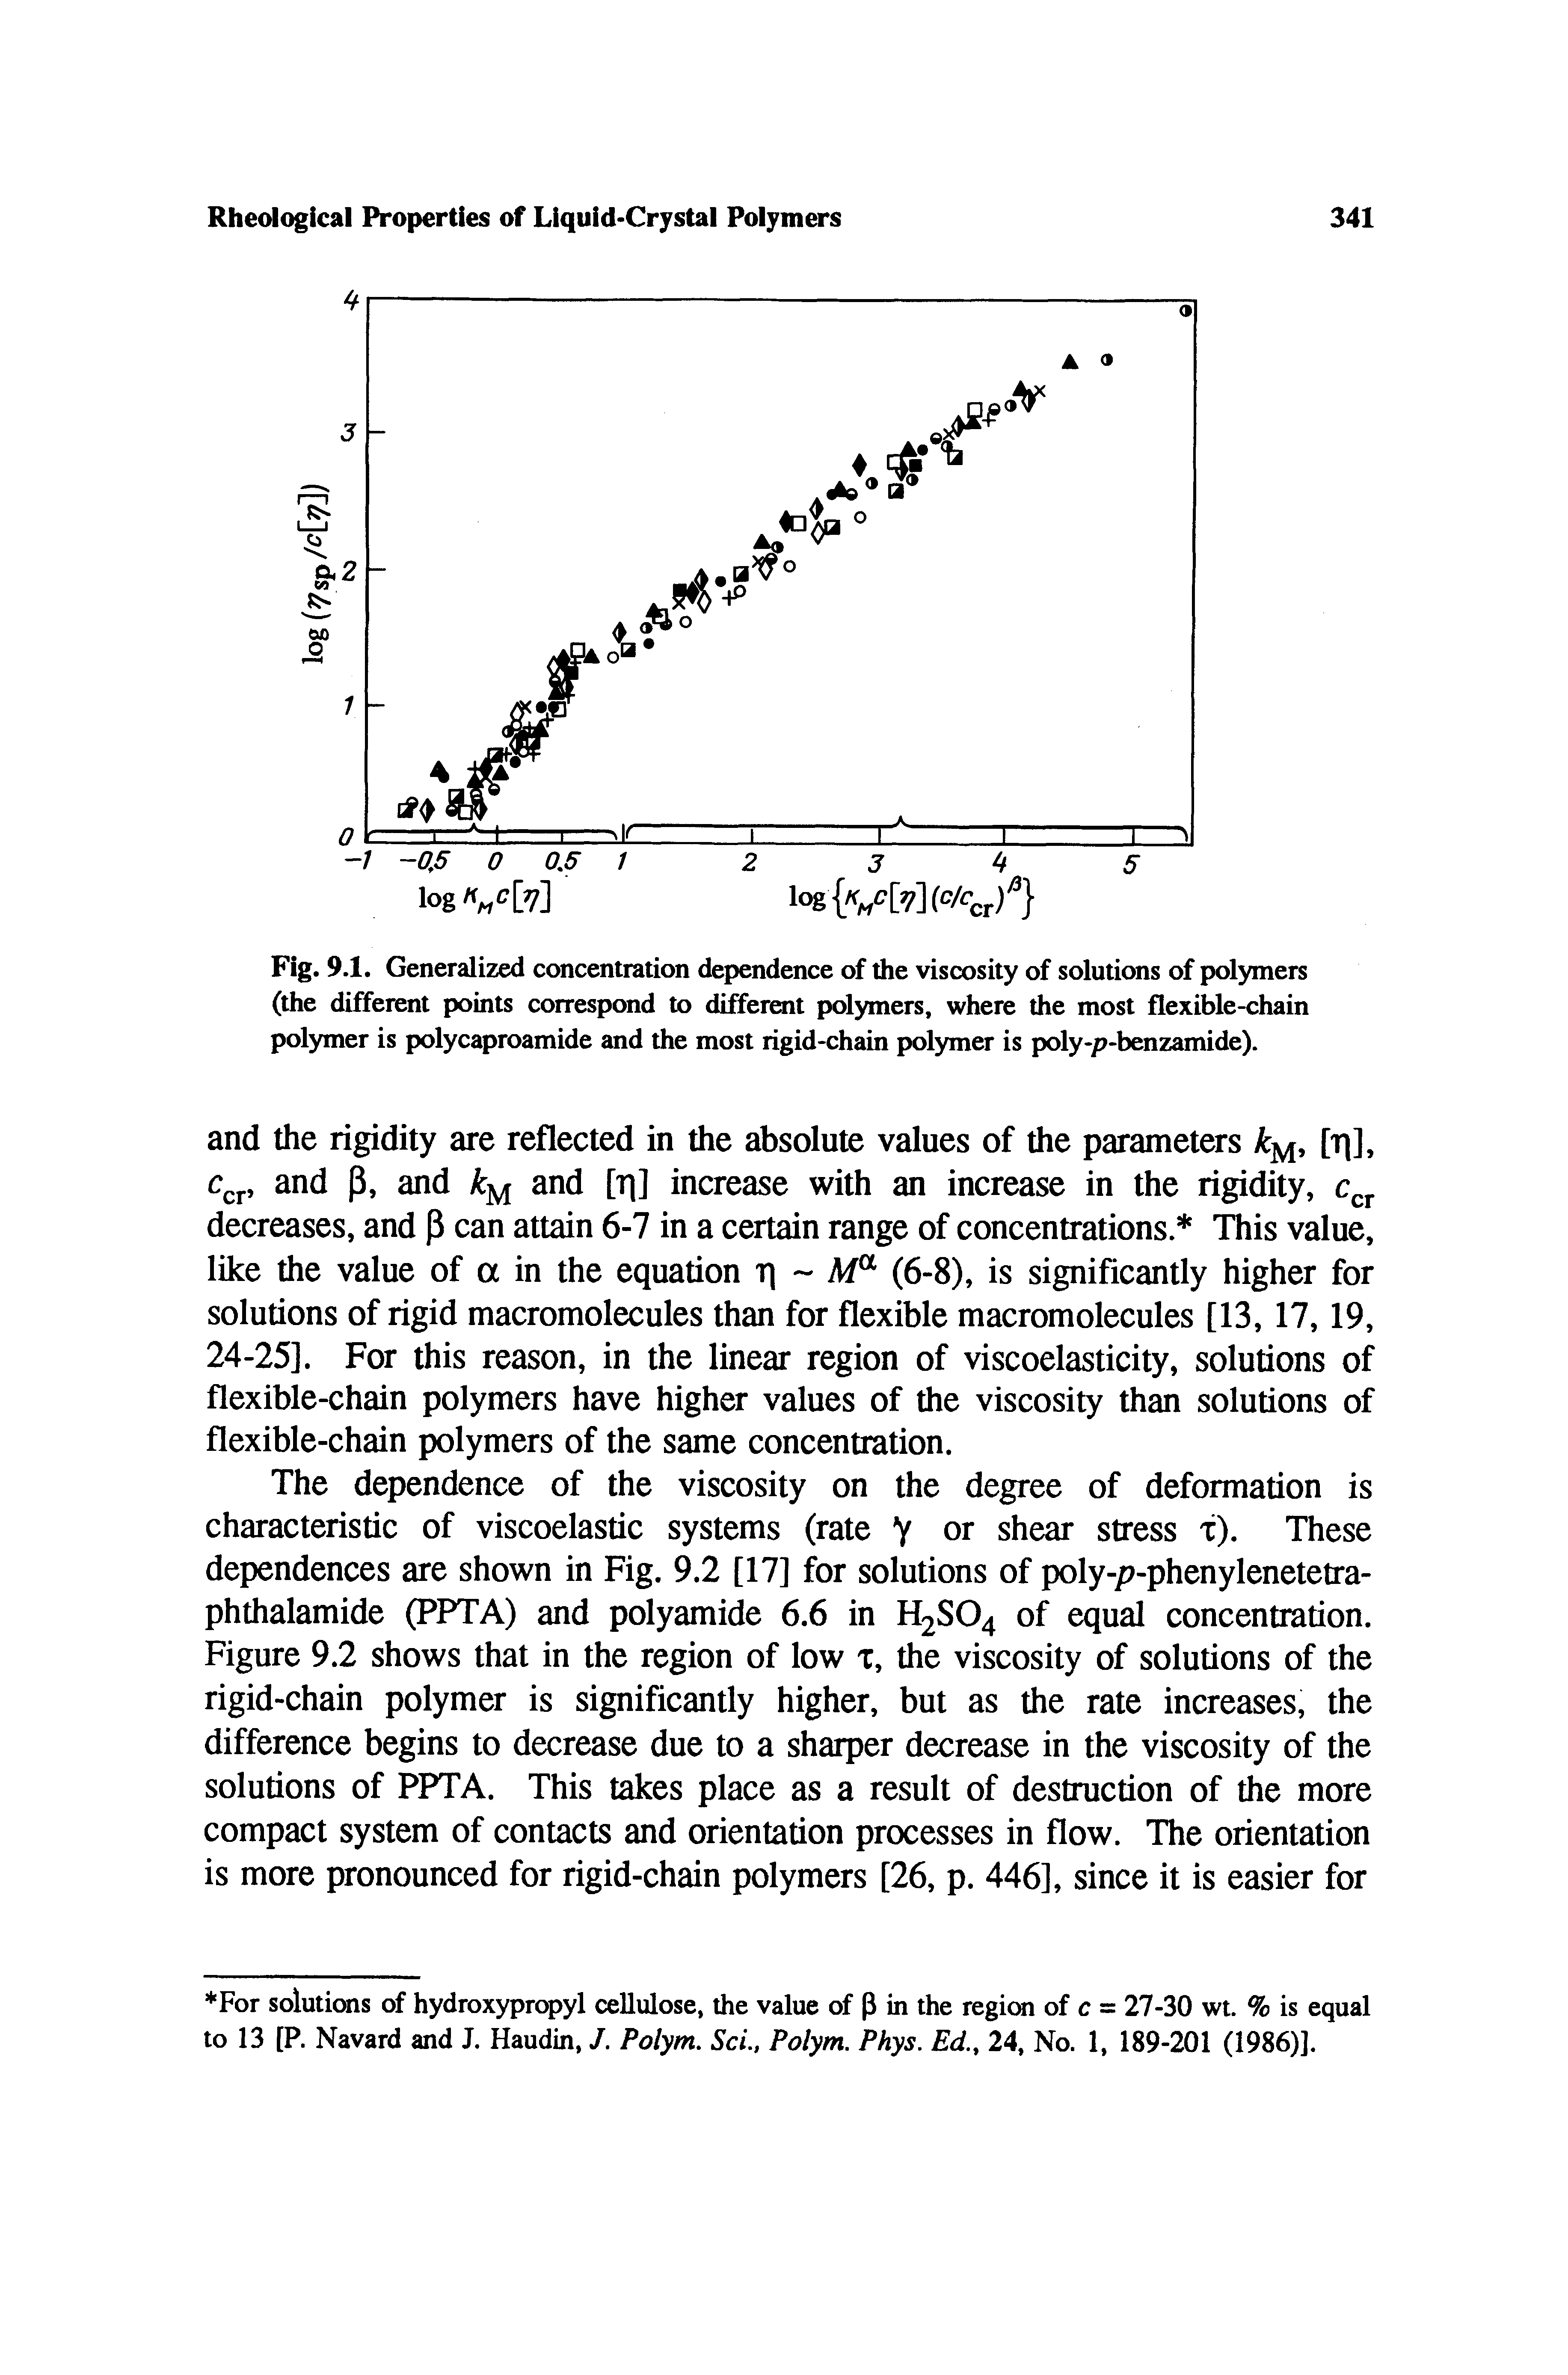 Fig. 9.1. Generalized concentration dependence of the viscosity of solutions of polymers (the different points correspond to different polymers, where the most flexible-chain polymer is polycaproamide and the most rigid-chain polymer is poly-p-benzamide).